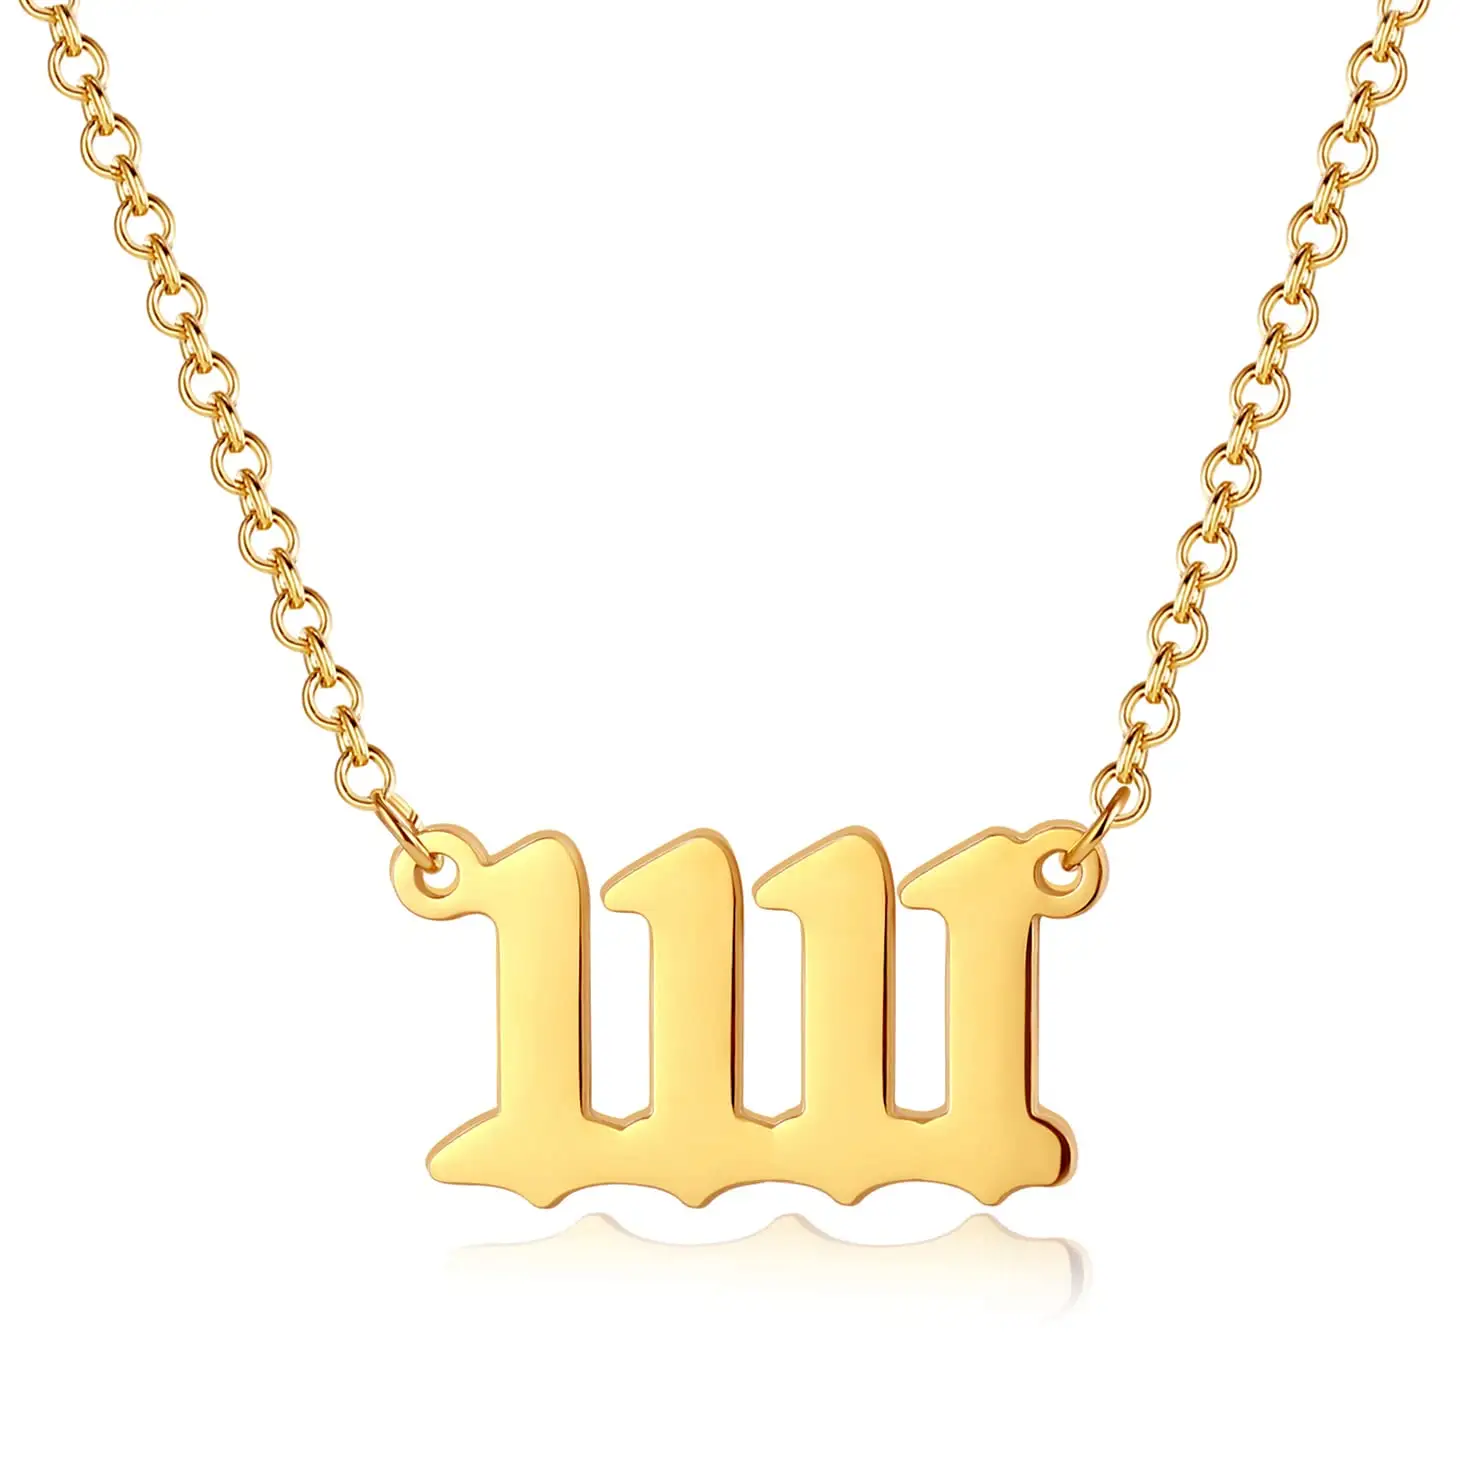 Fashion accessories design 1 to 9 simple vintage lucky blessing number sequence pendant angel number necklaces